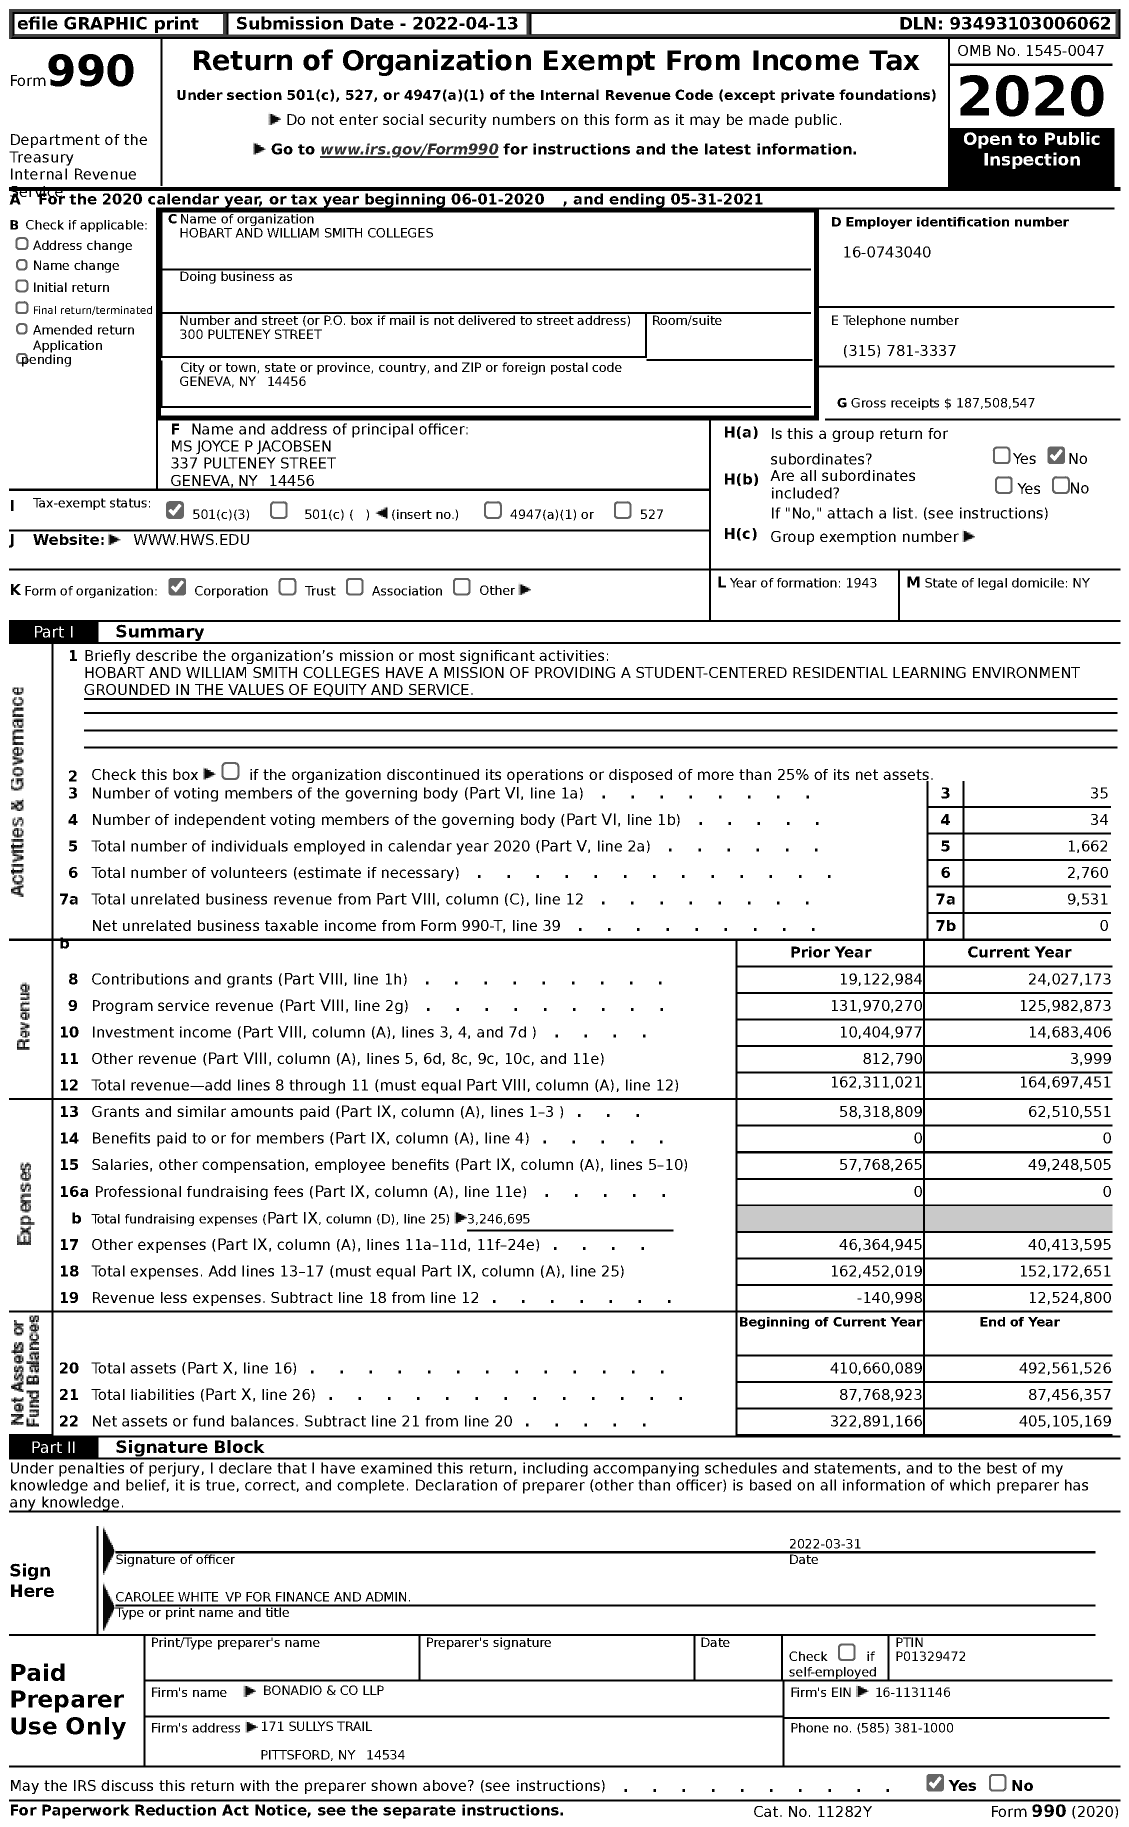 Image of first page of 2020 Form 990 for Hobart and William Smith Colleges (HWS)